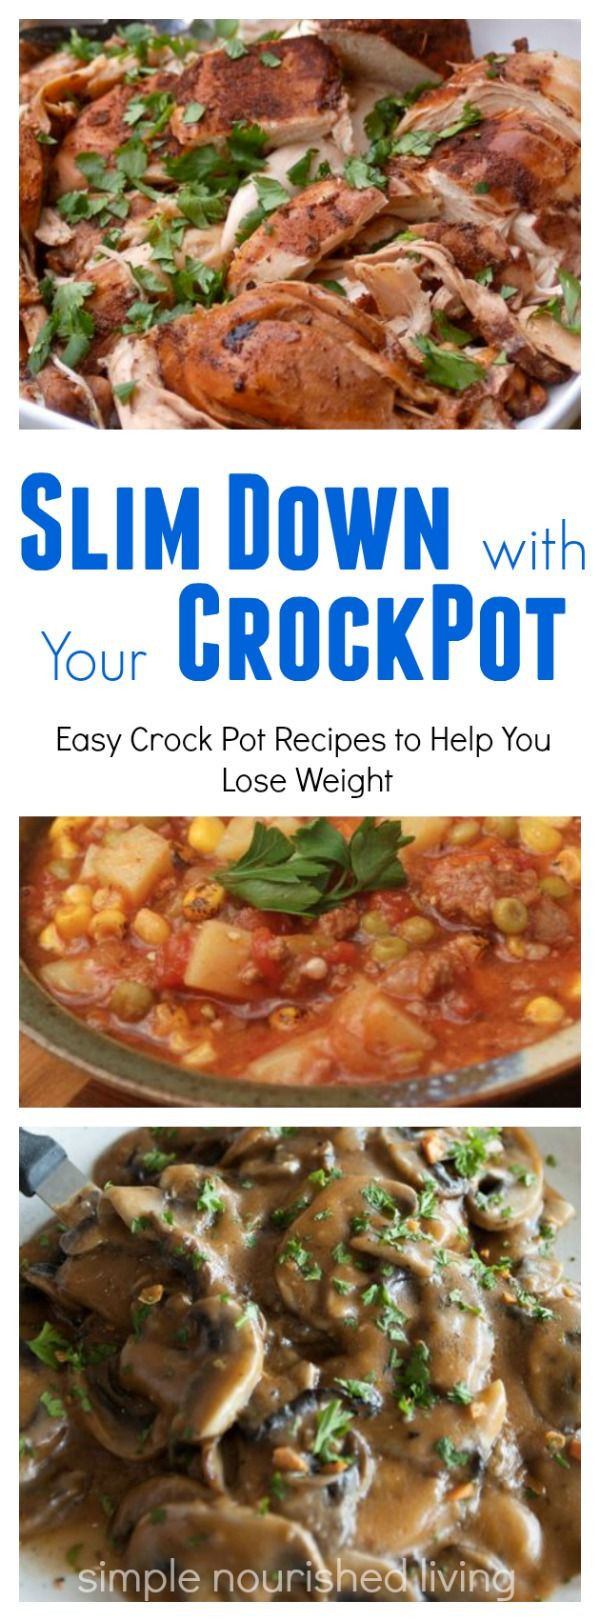 Crockpot Low Calorie Recipes
 Easy Healthy Low Calorie Slow Cooker Recipes with